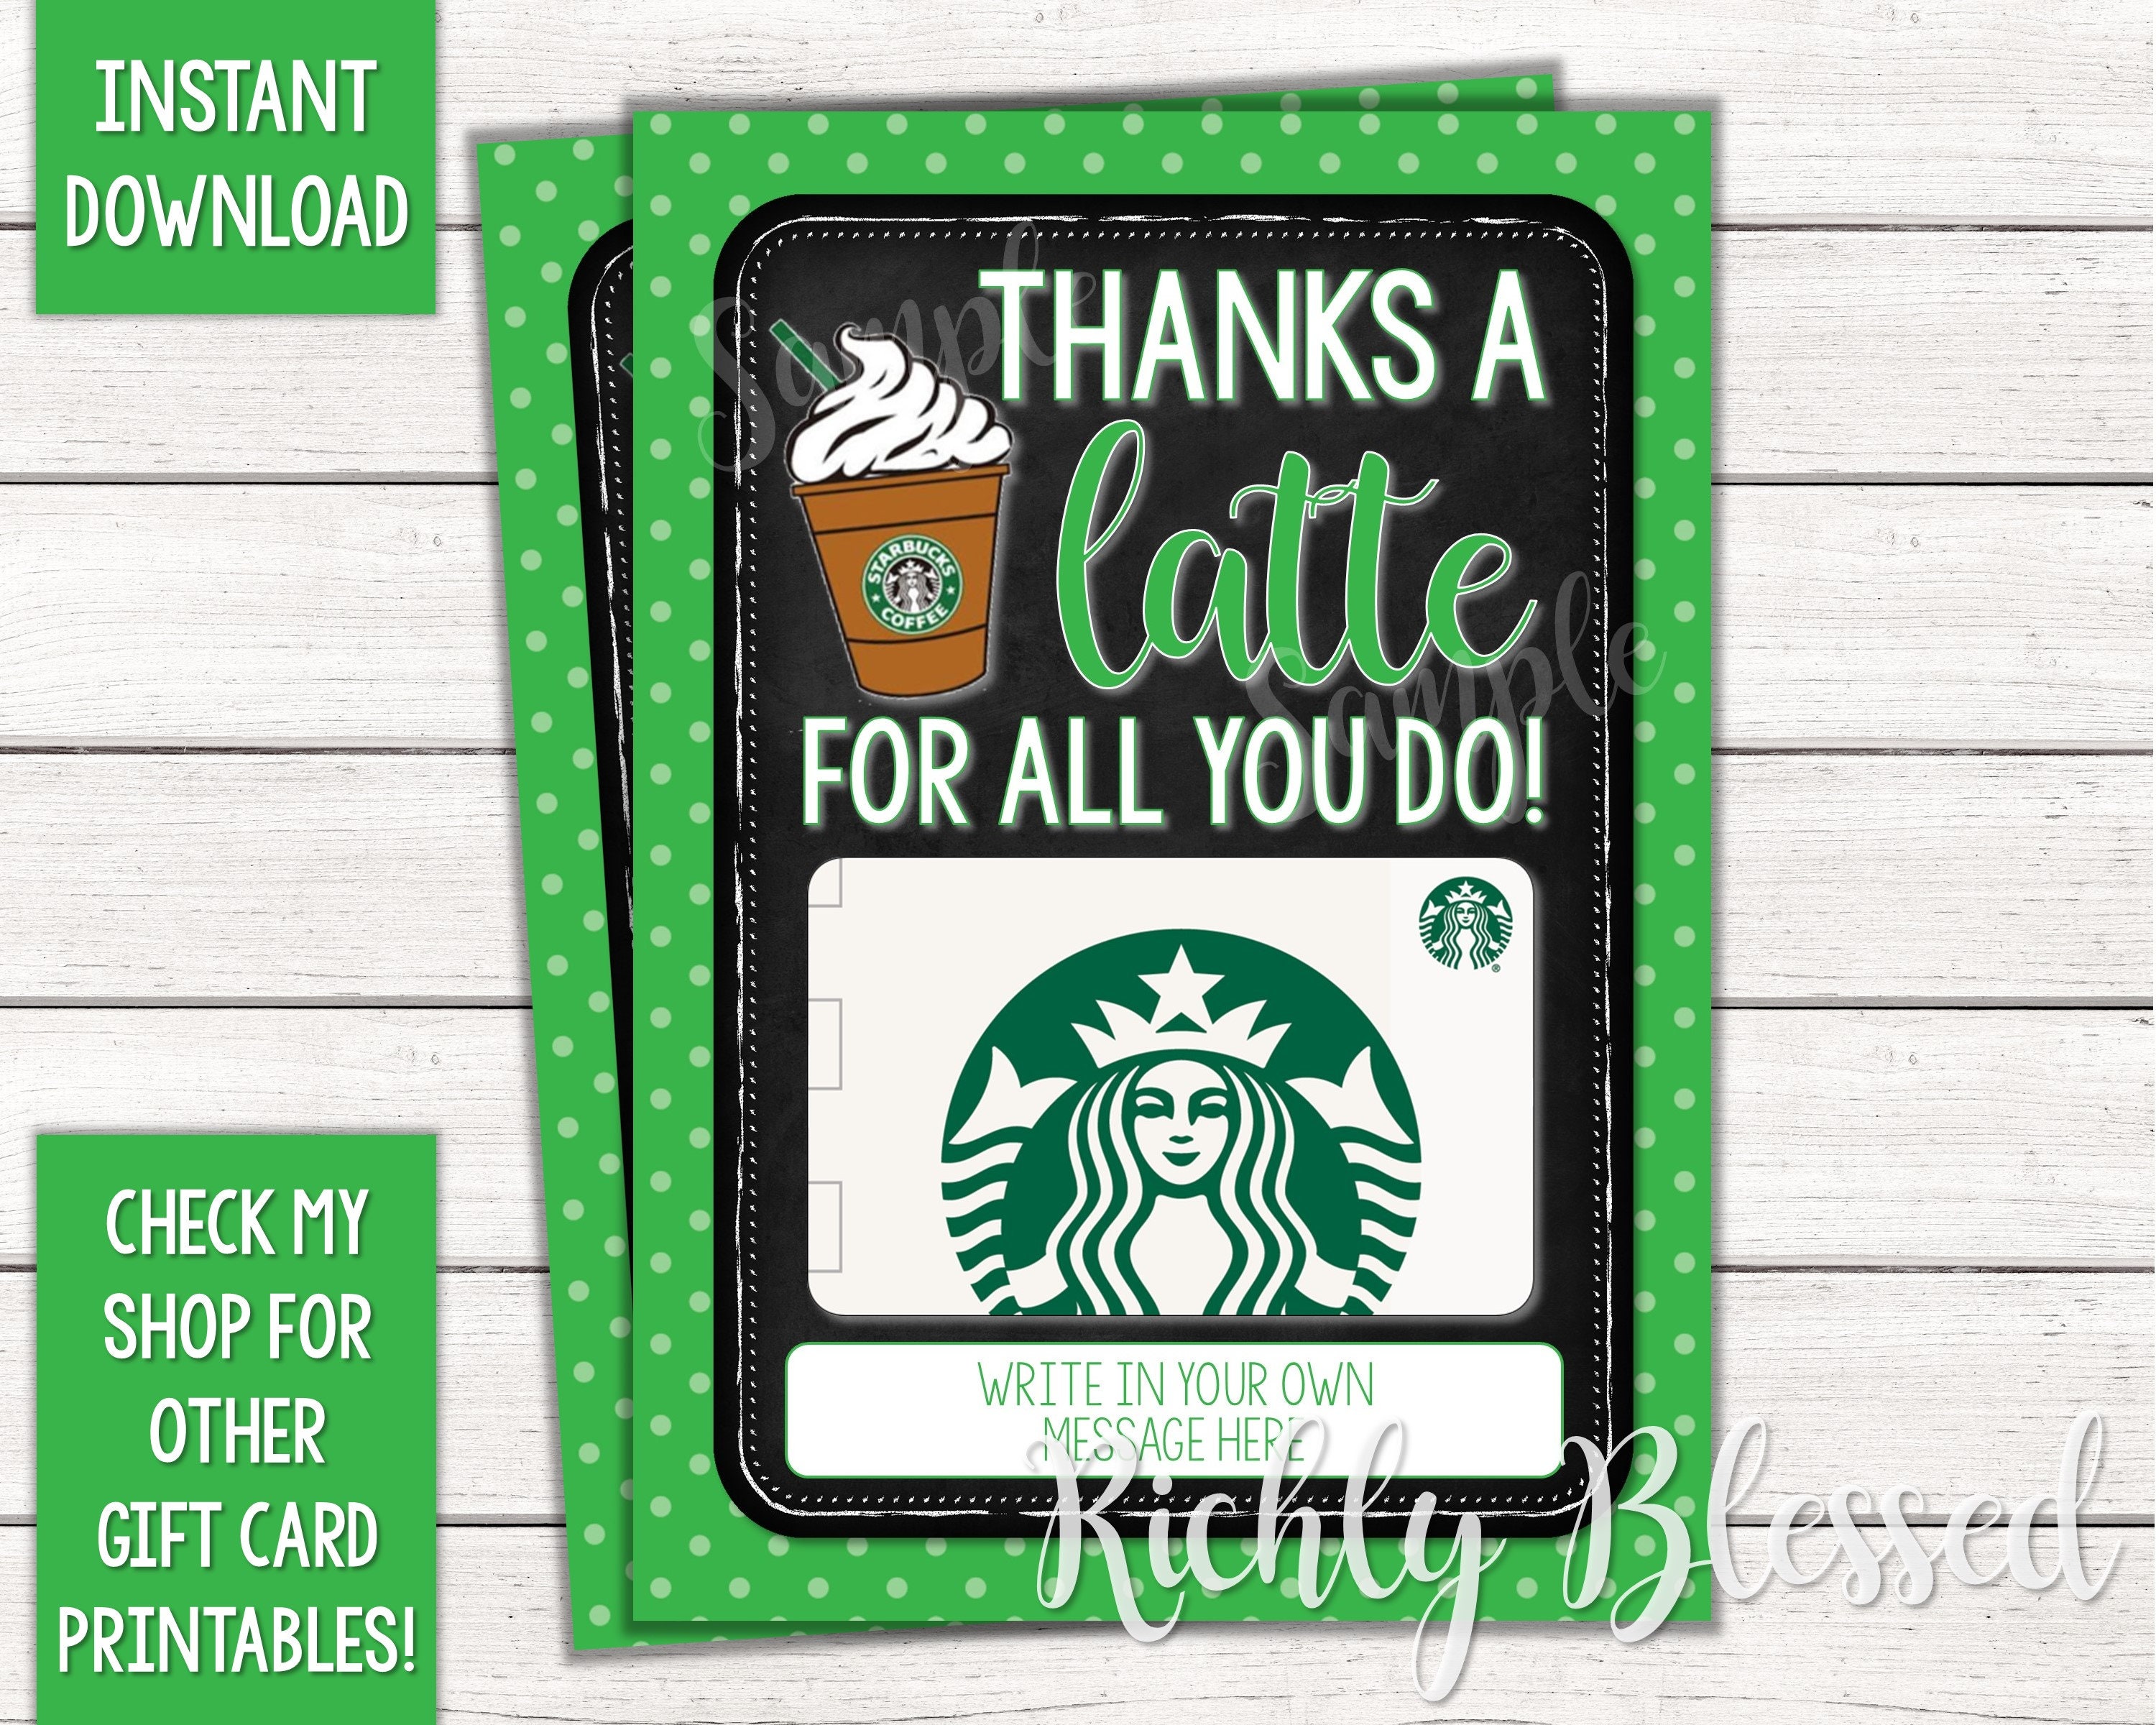 collectibles-collectible-advertising-starbucks-gift-cards-happy